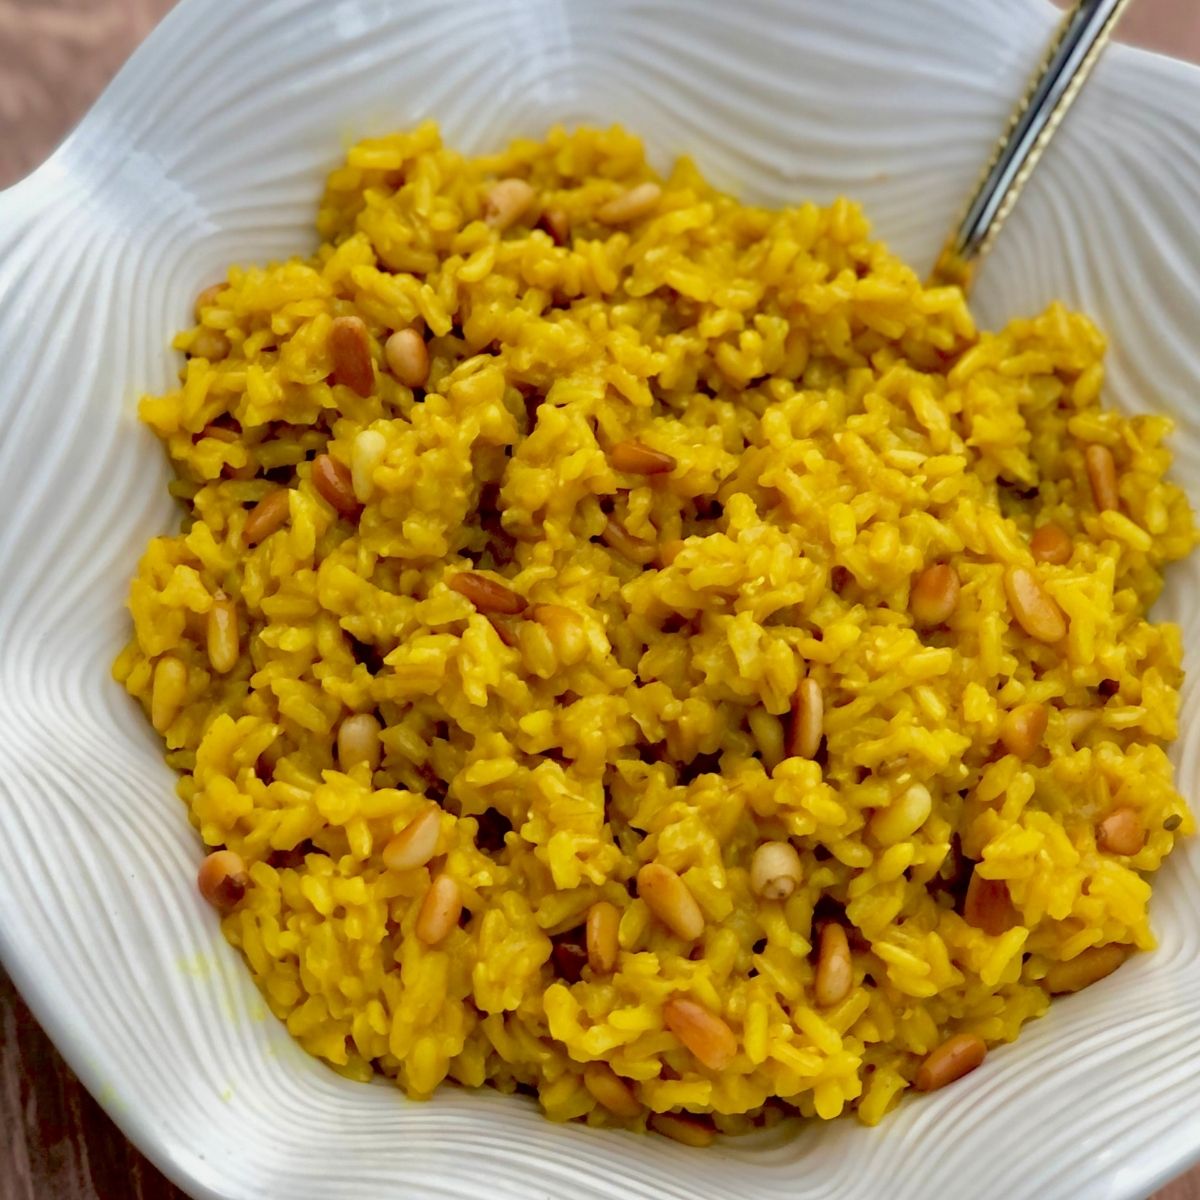 A white bowl is full of yellow colored rice with pine nuts with a sliver spoon sticking out.